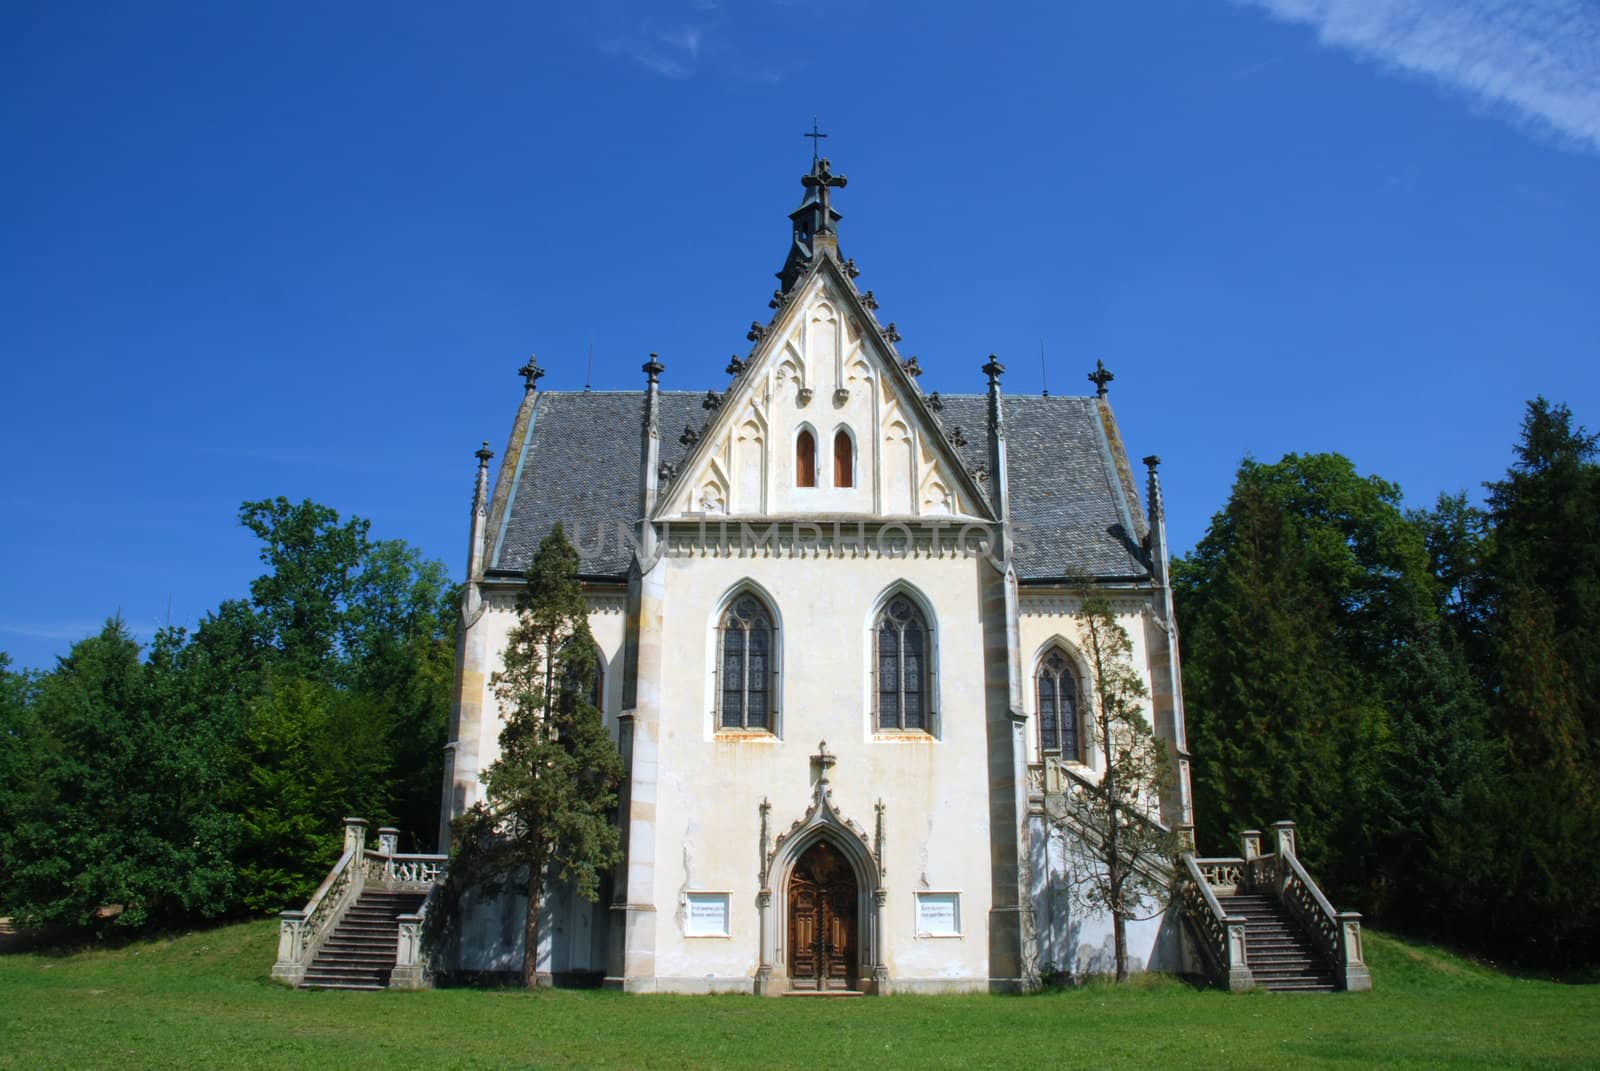 Old castle - tomb of Czeh nobility